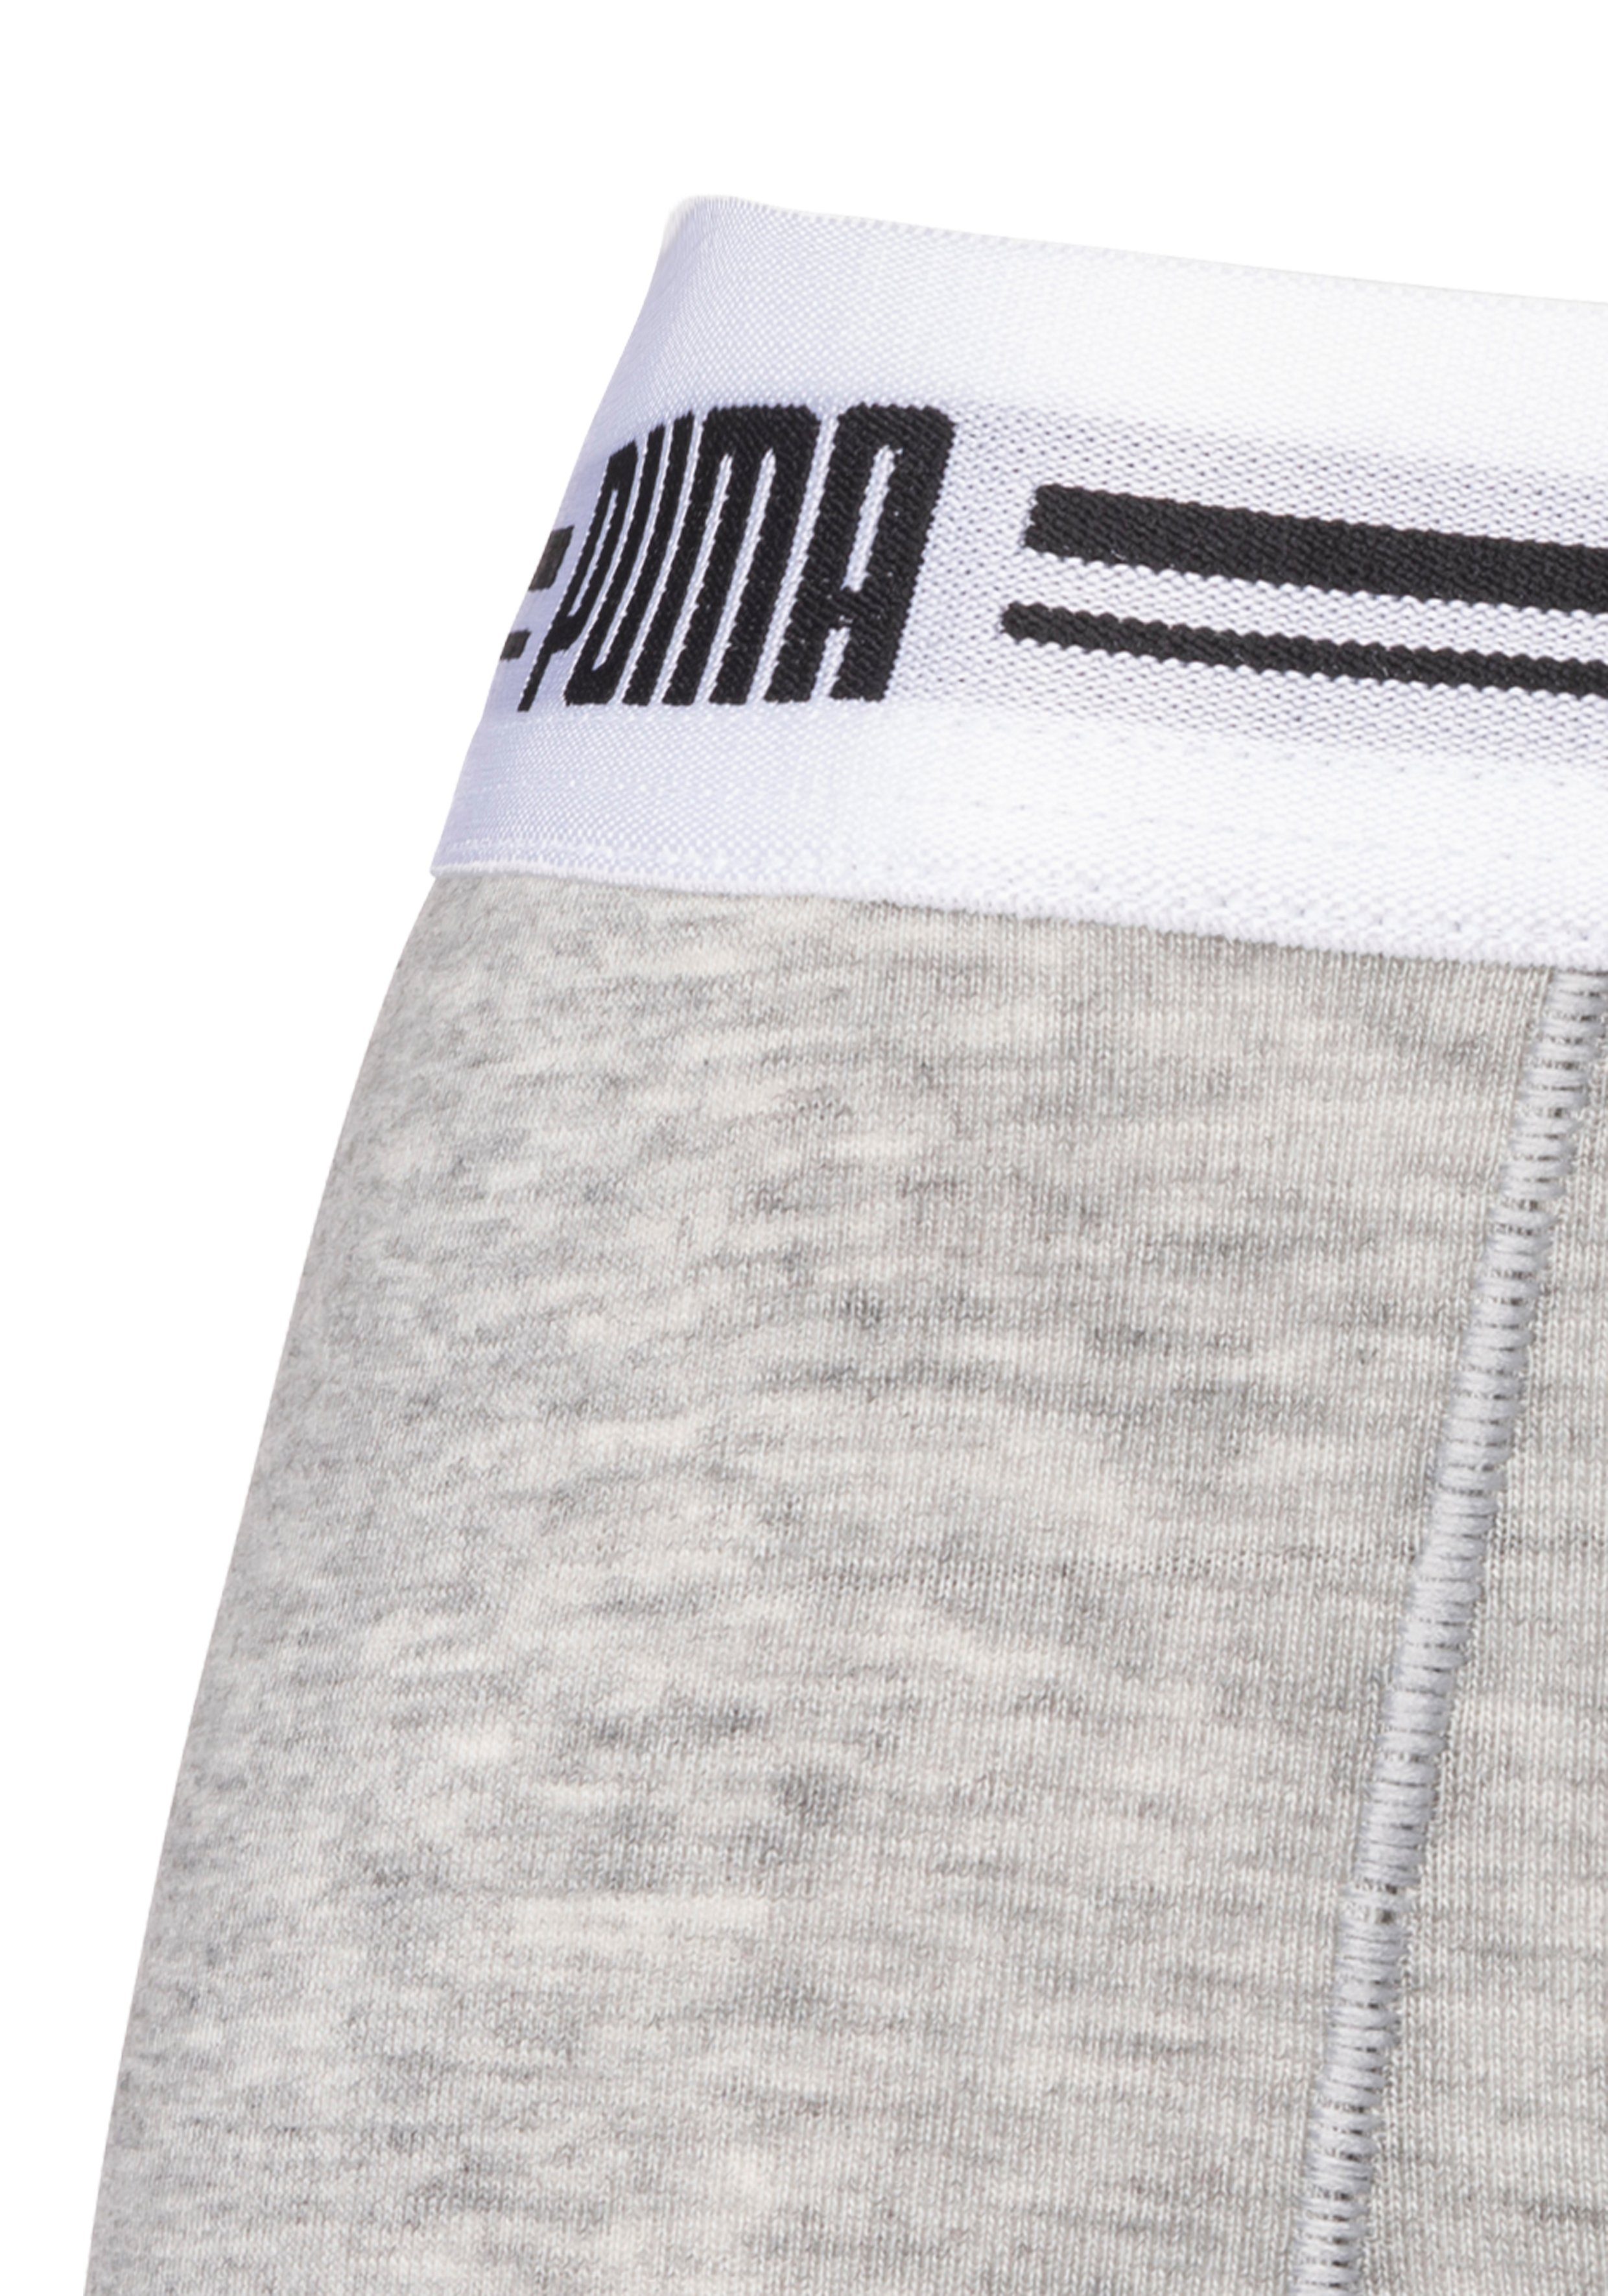 Iconic 2-St) Panty PUMA (Packung, grau-meliert